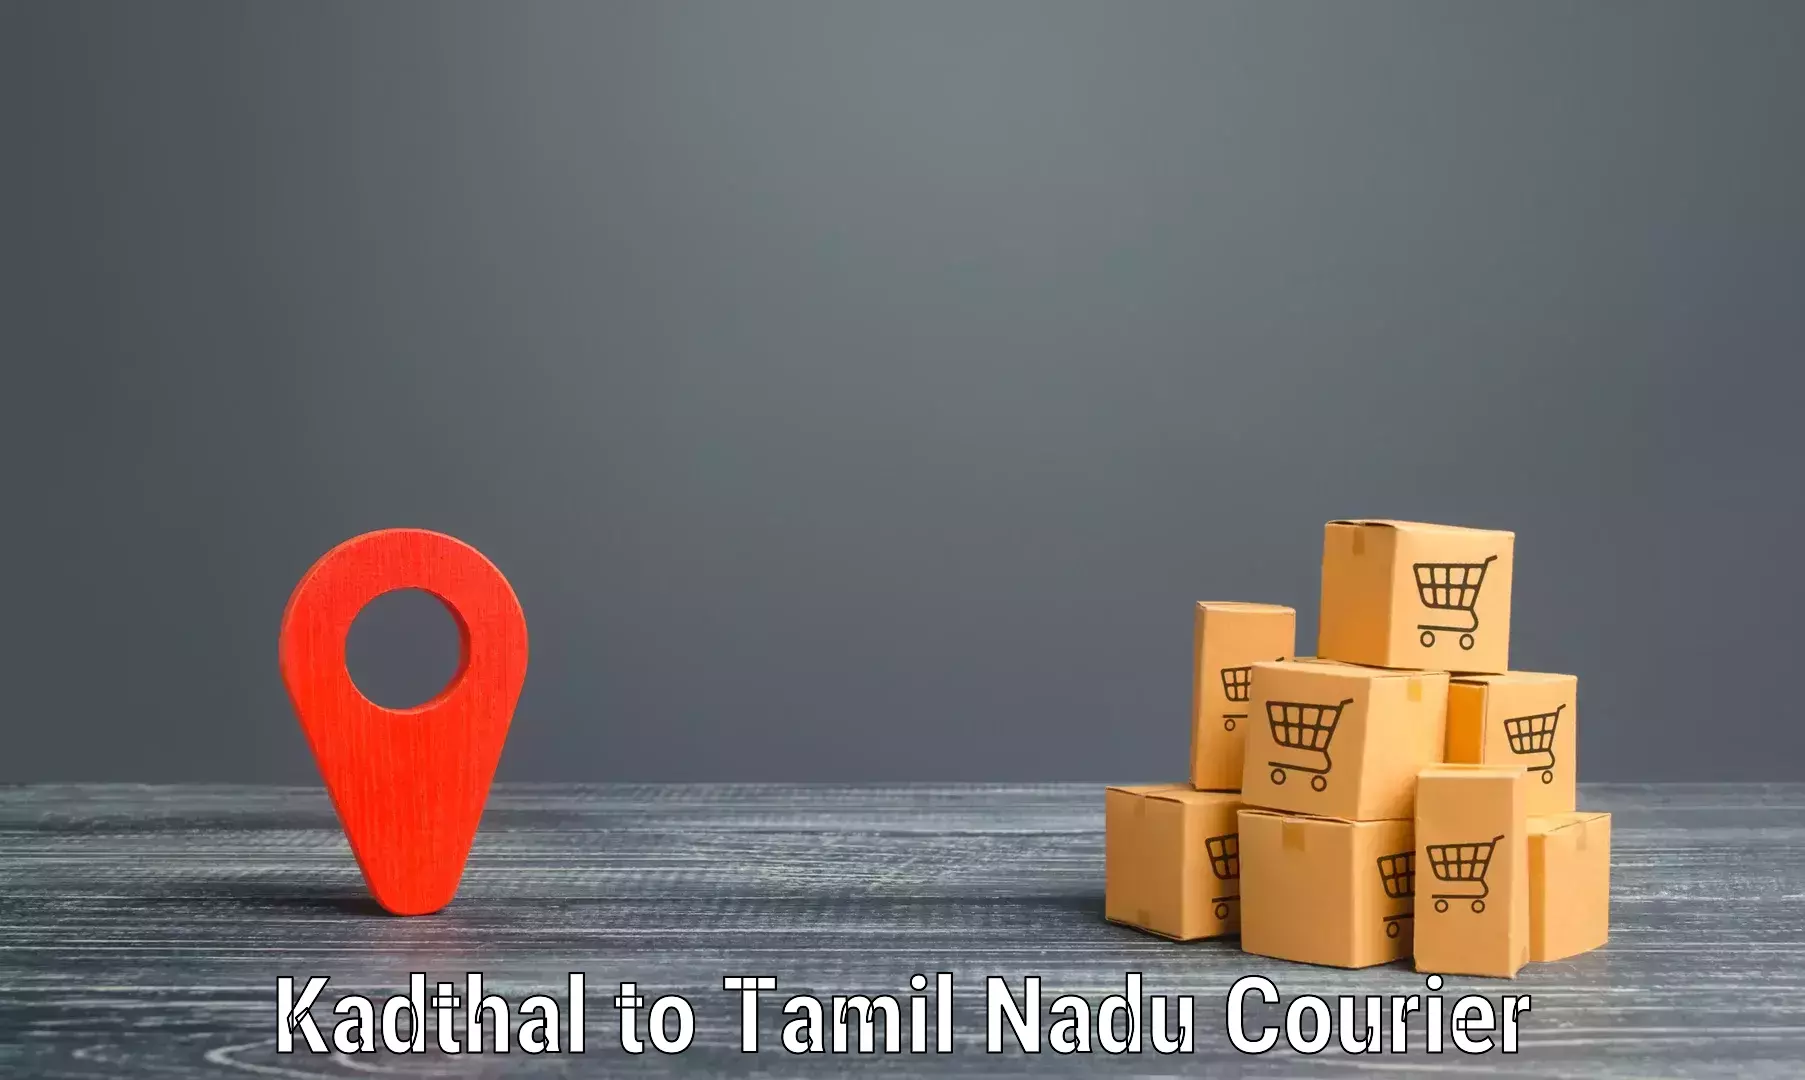 Cost-effective courier options Kadthal to Vriddhachalam